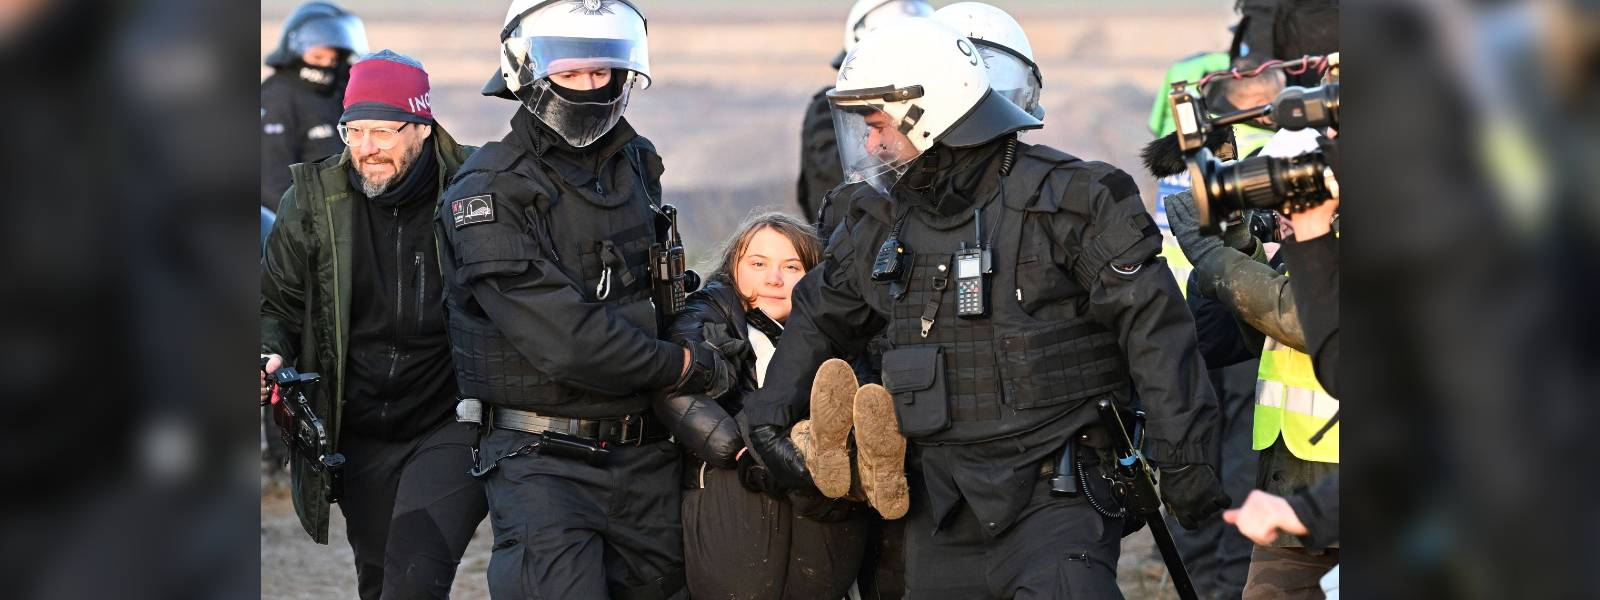 Greta detained in Germany over coal mine protest